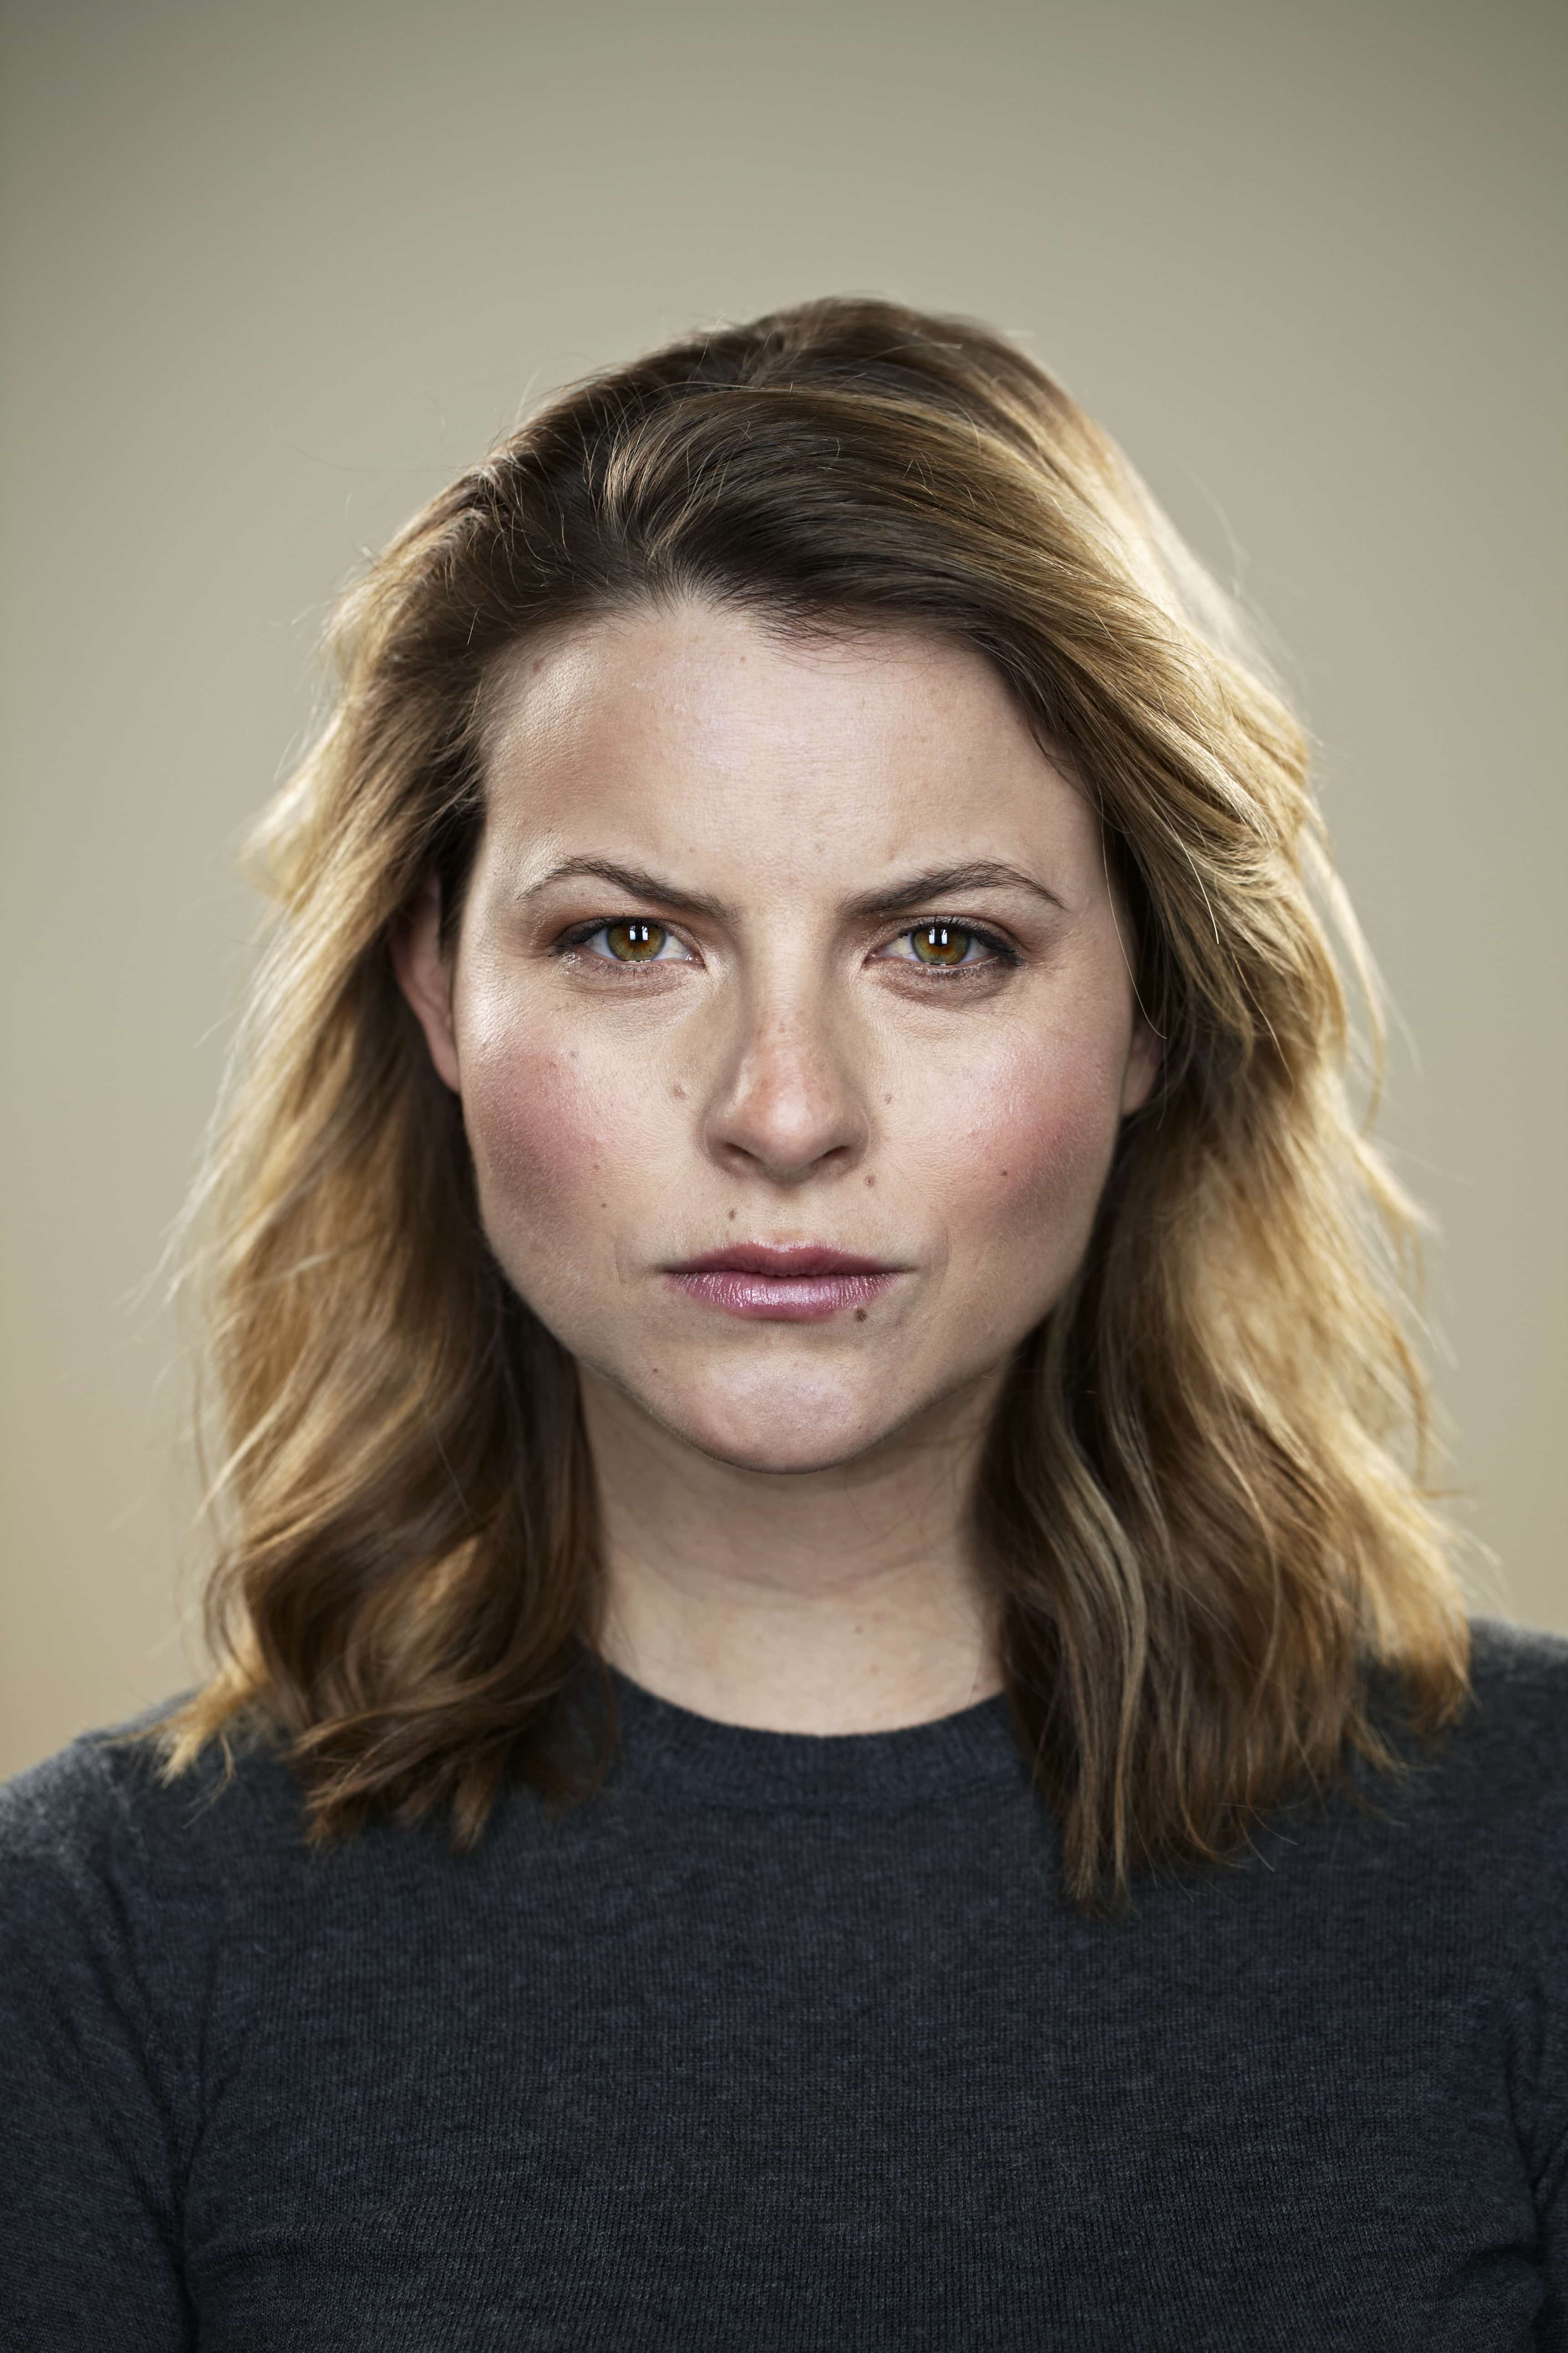 Portrait of a woman looking angry.